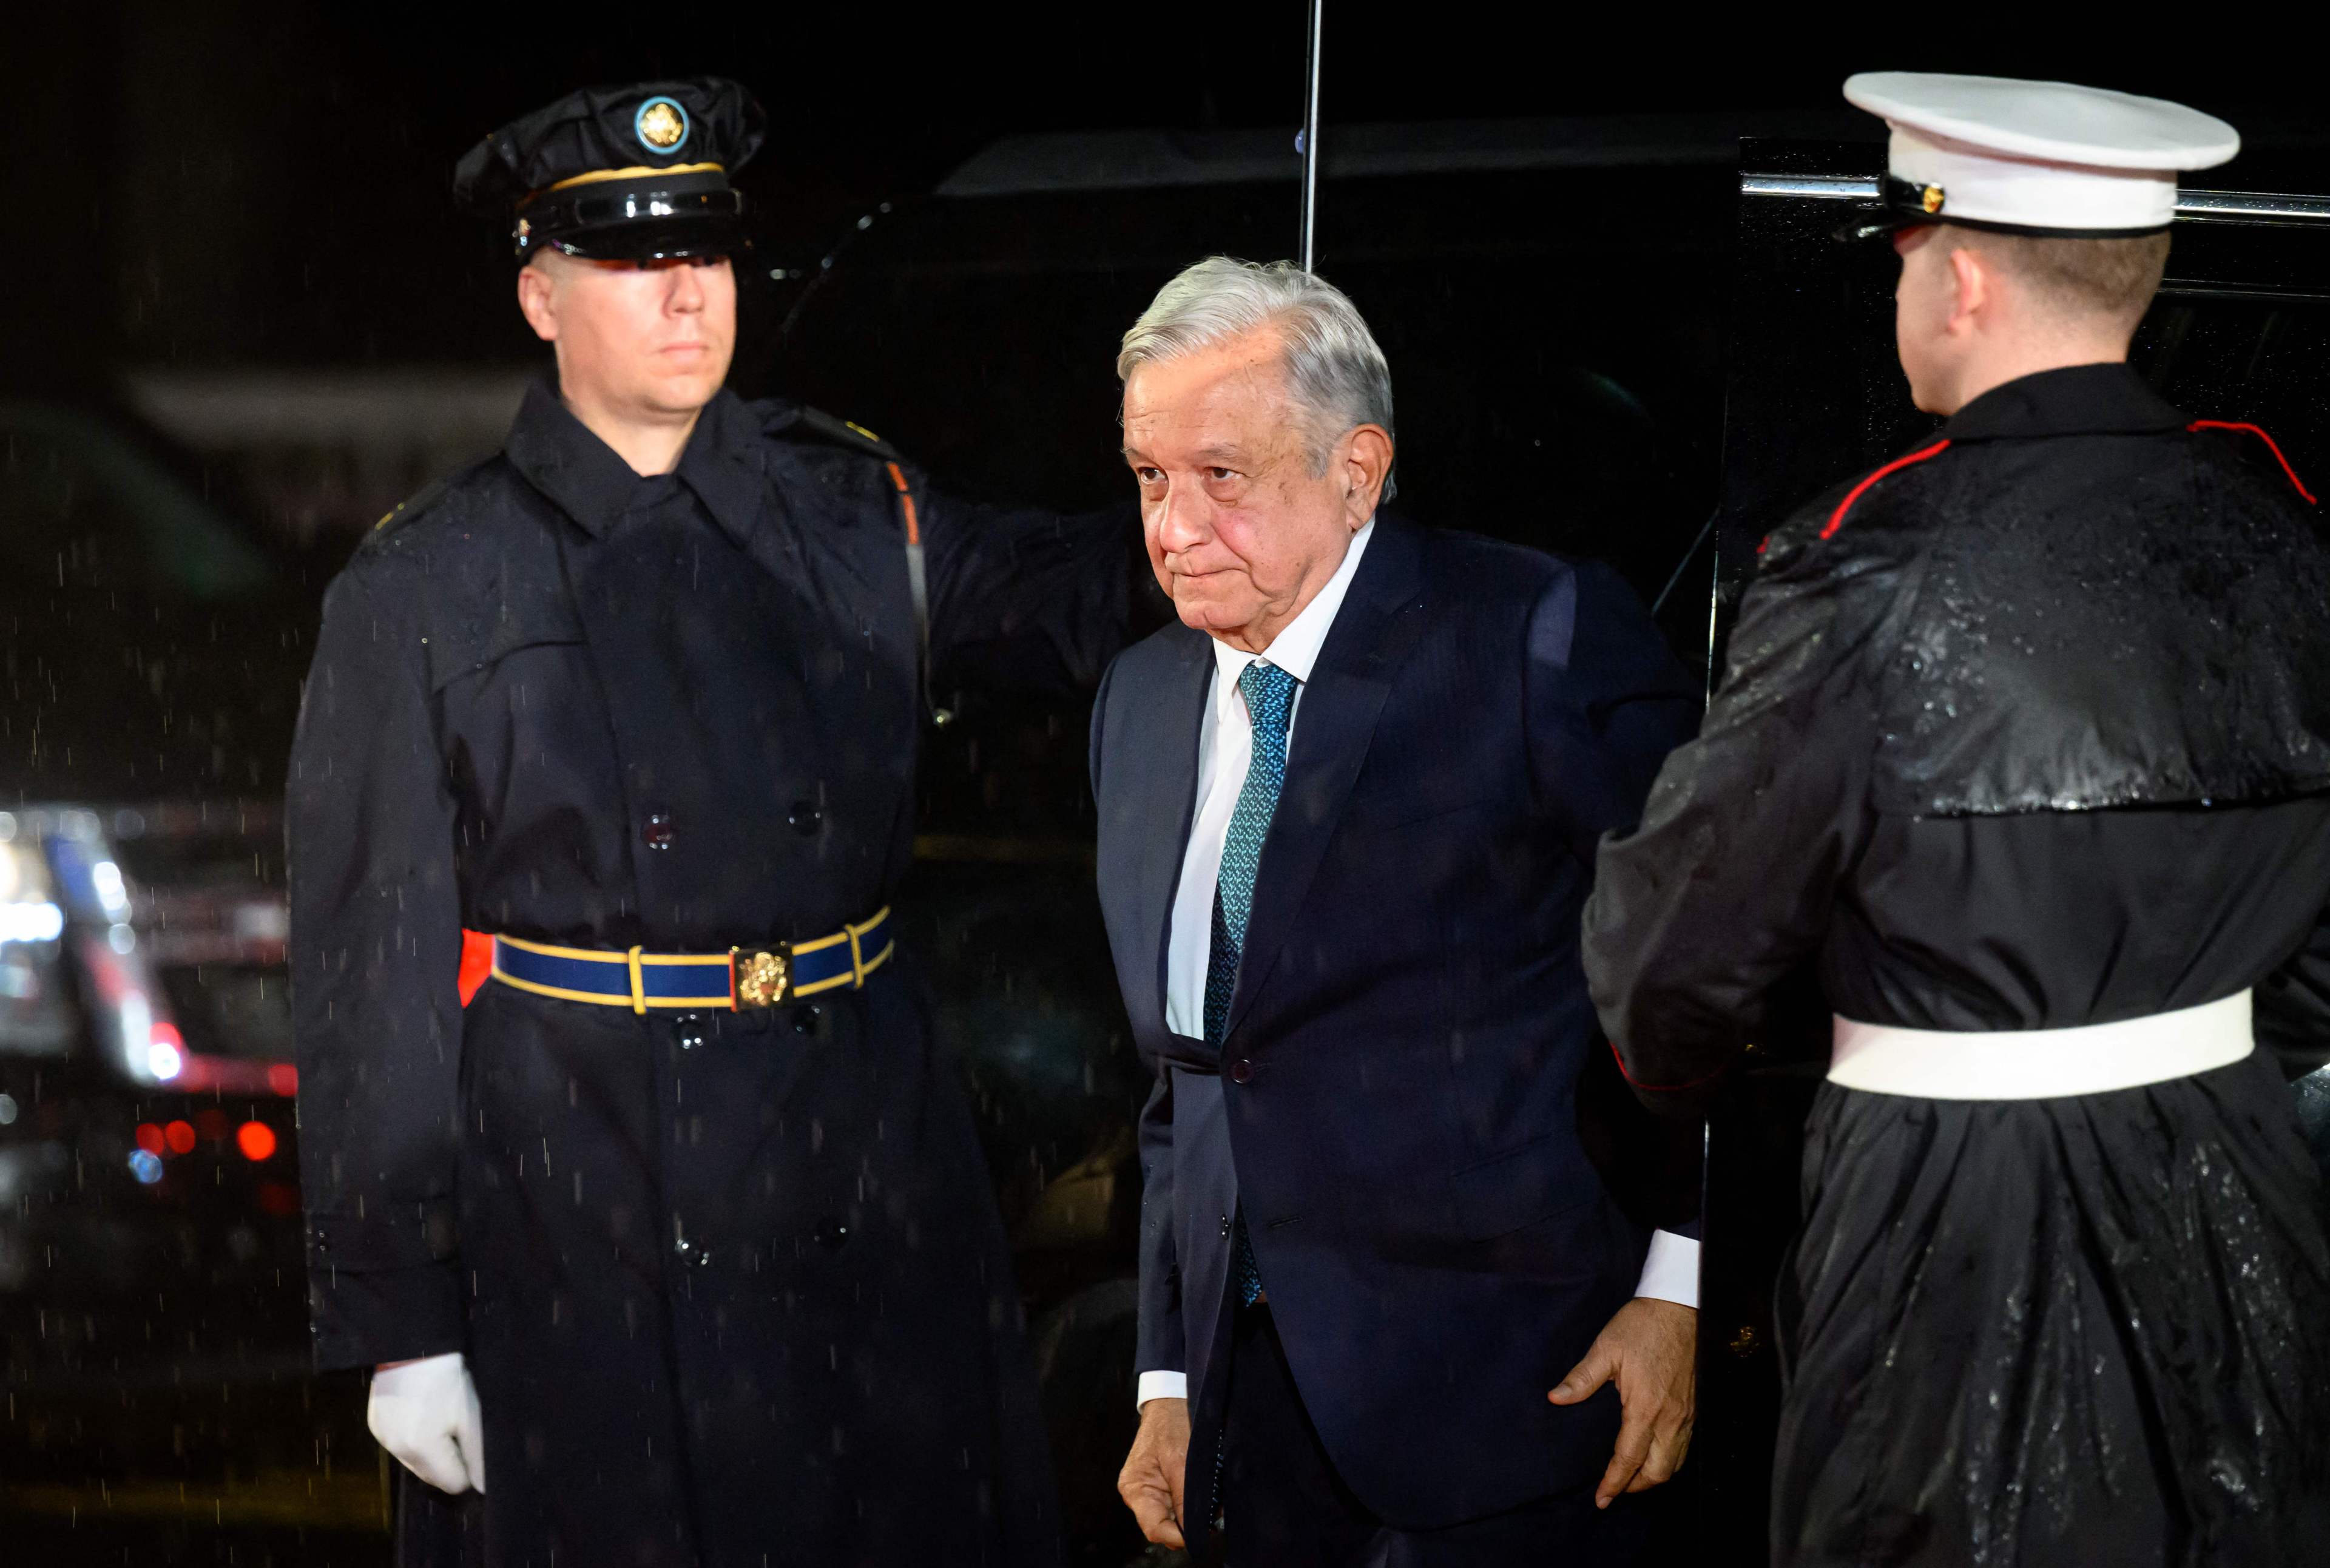 Mexico's President Andres Manuel Lopez Obrador, dressed in a suit walks between two members of security personnel.